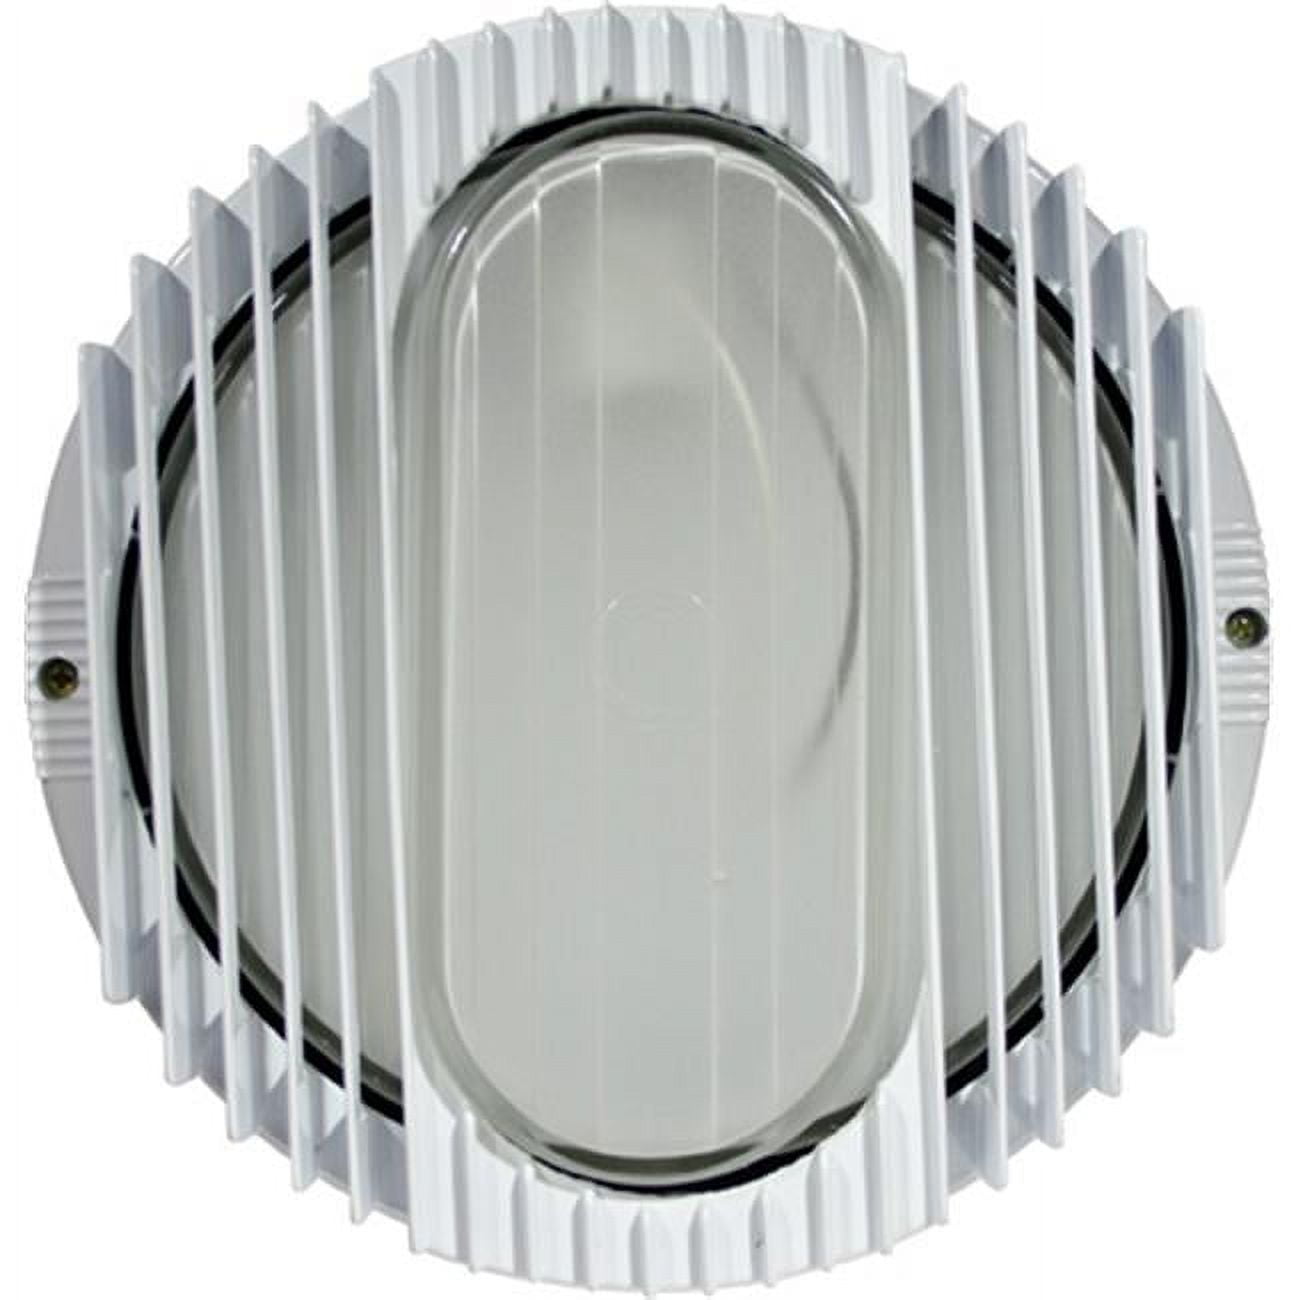 10.13 X 10.13 X 3 In. 120 V 26 Watts Powder Coated Cast Aluminum Surface Mounted Wall Fixture Light With S26-gu-24 Flourescent Lamp, White